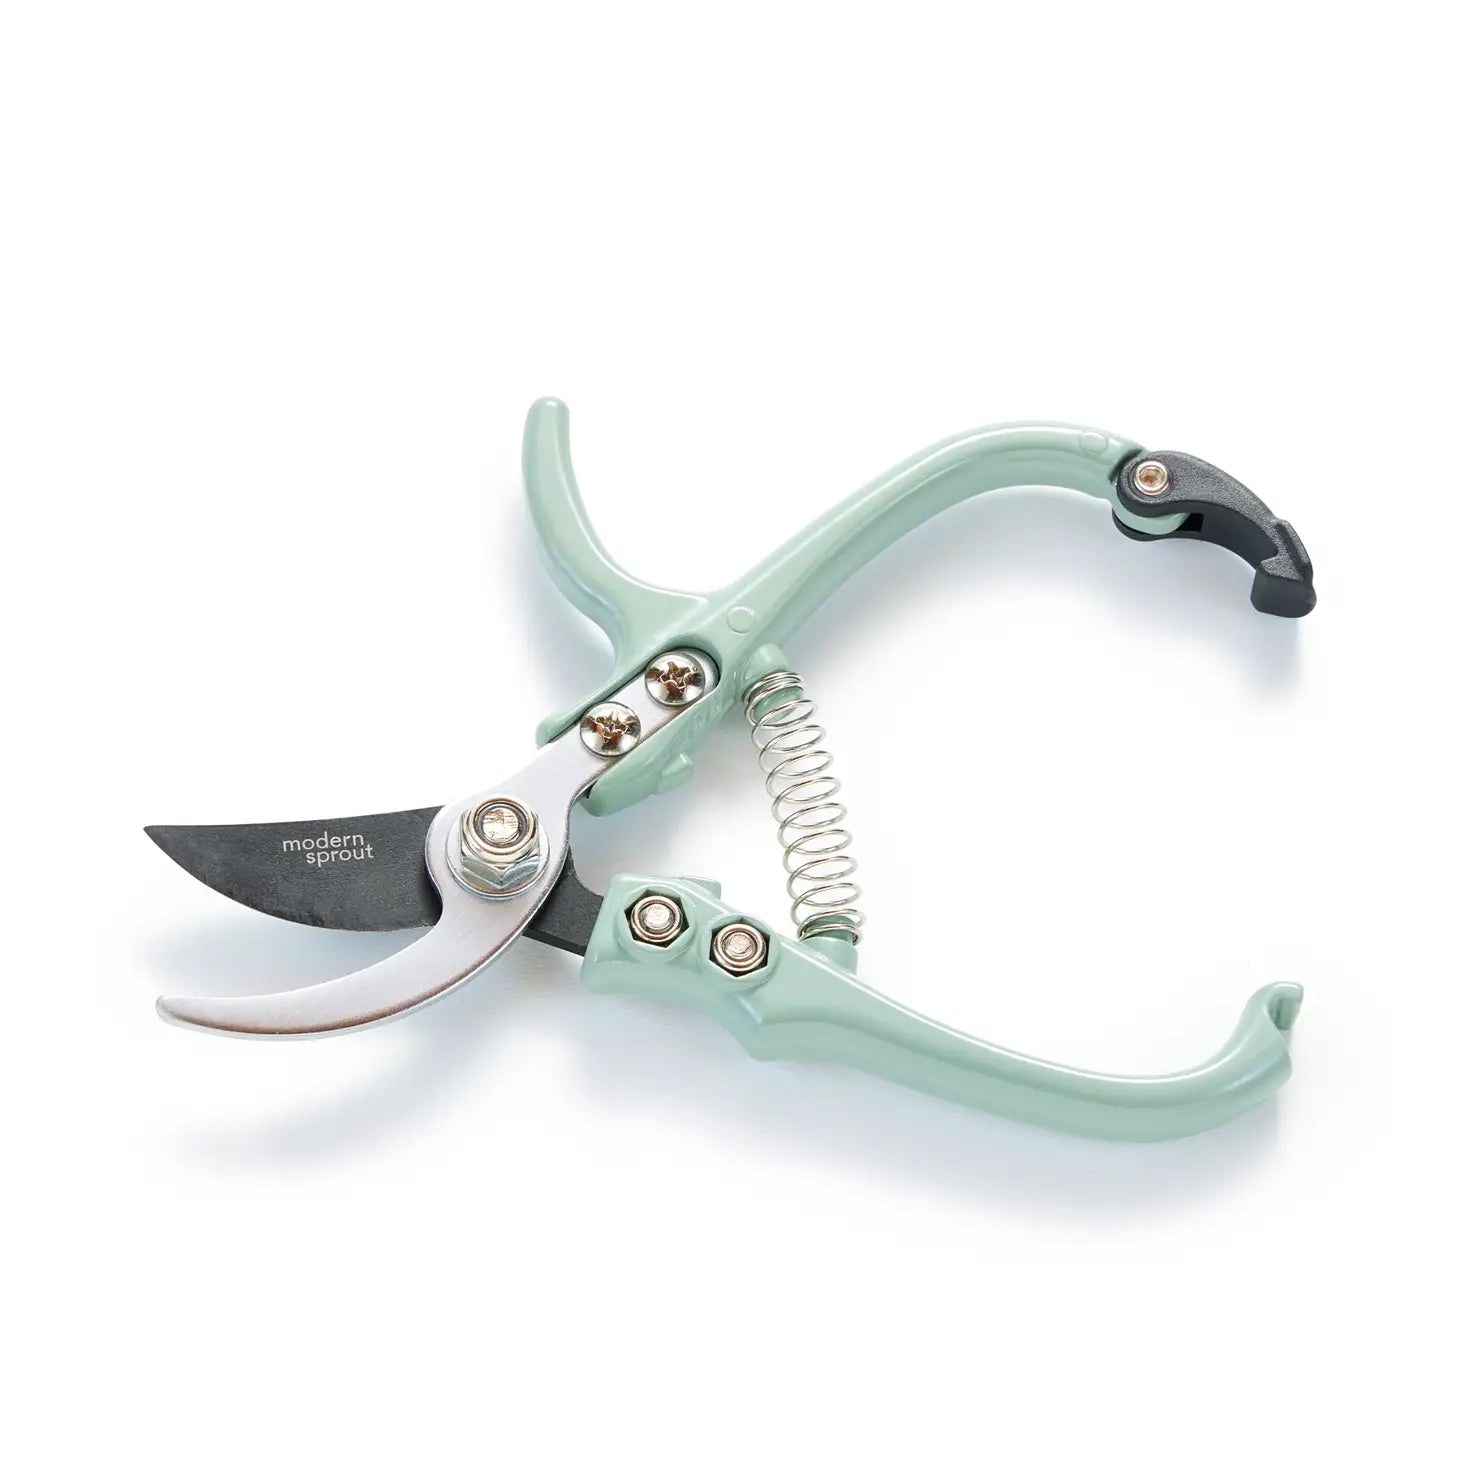 MS Pruning Pruners Modern Sprout